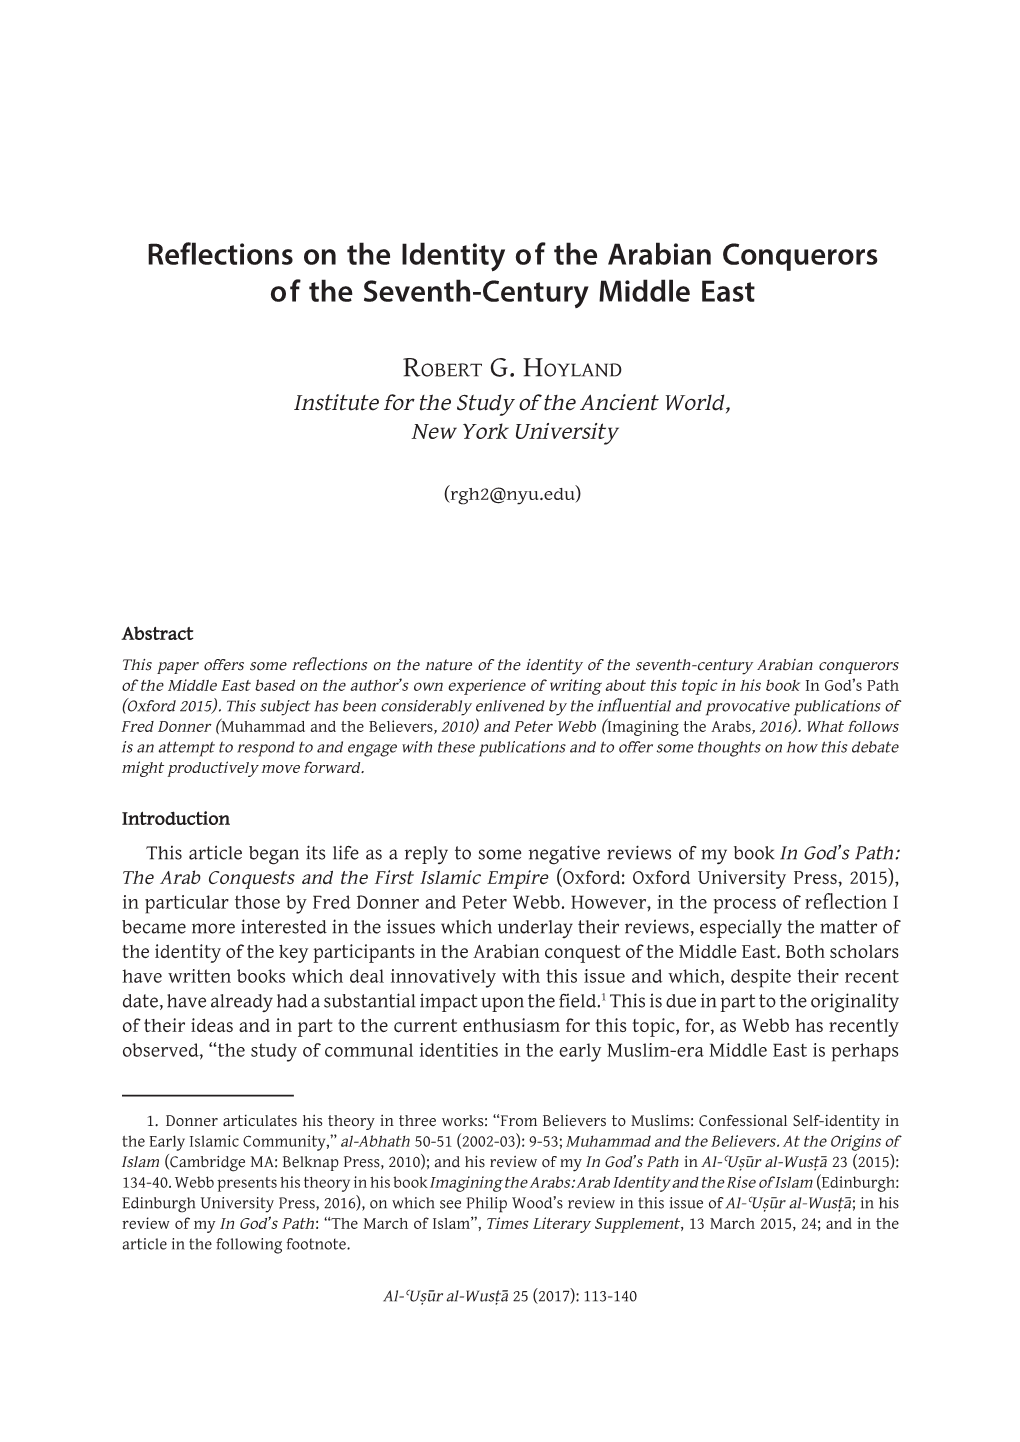 Reflections on the Identity of the Arabian Conquerors of the Seventh-Century Middle East